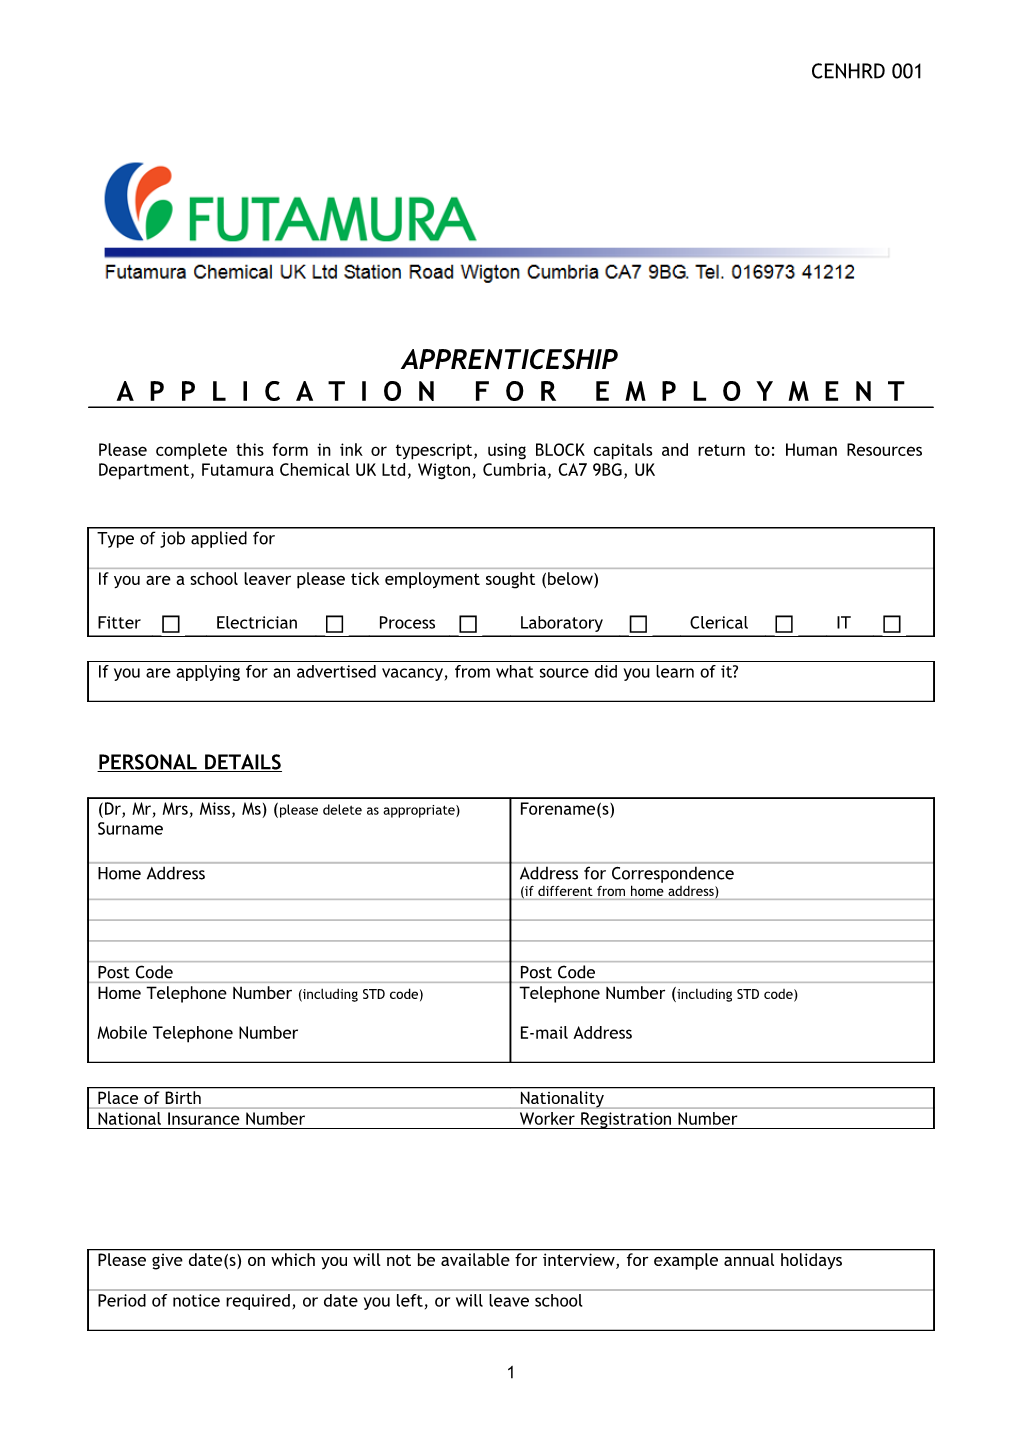 School Leaver/Hourly Paid Form